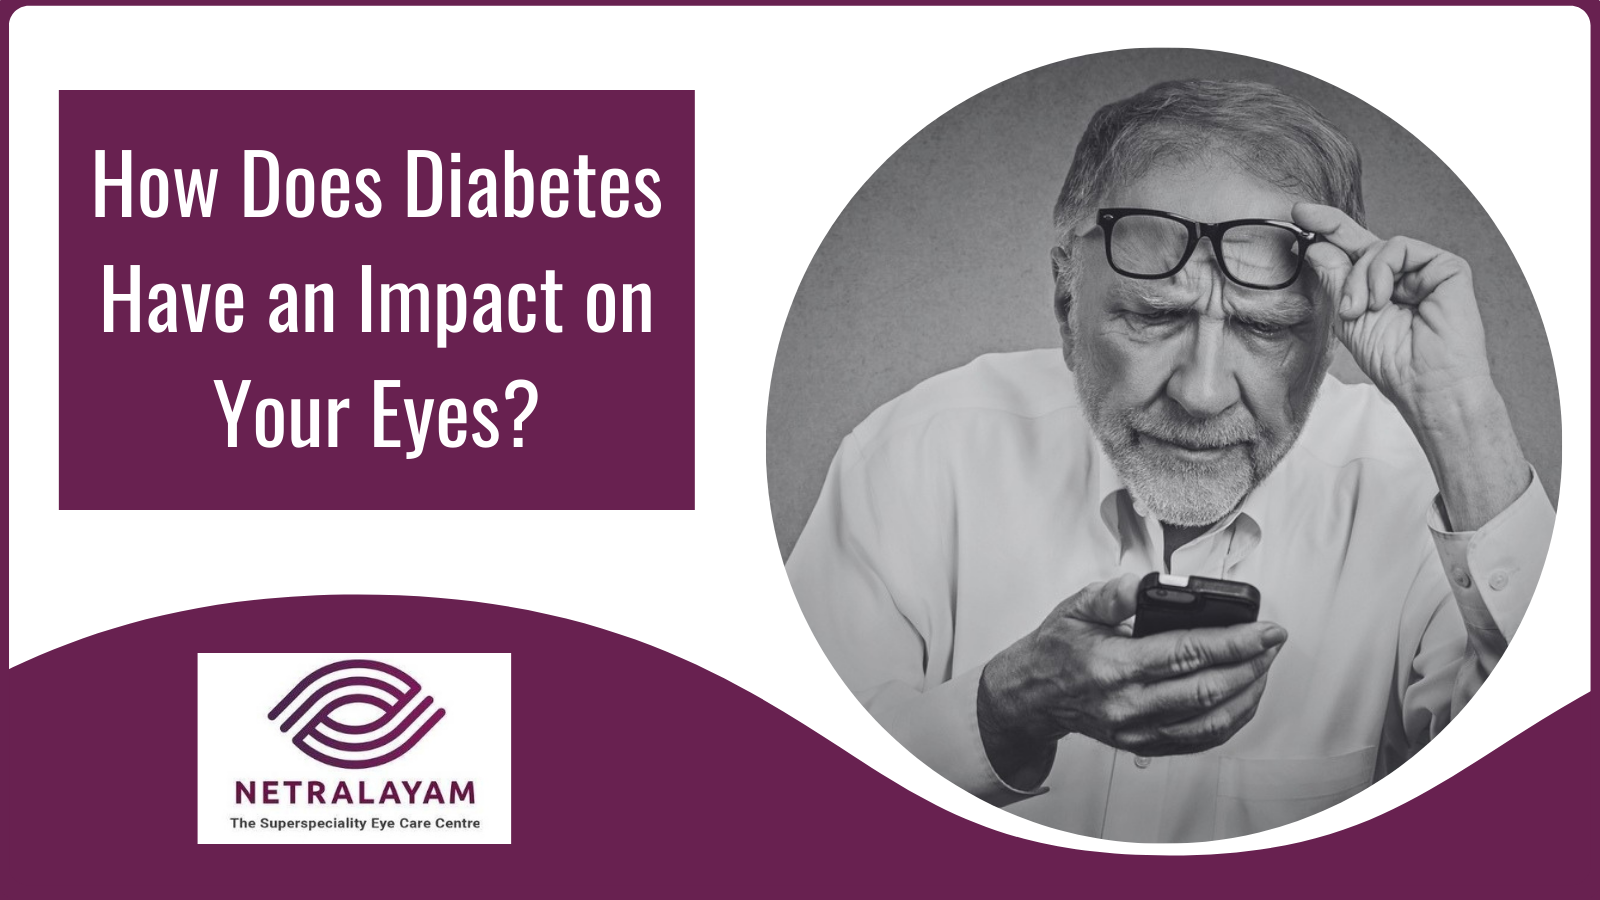 How Does Diabetes Have an Impact on Your Eyes?